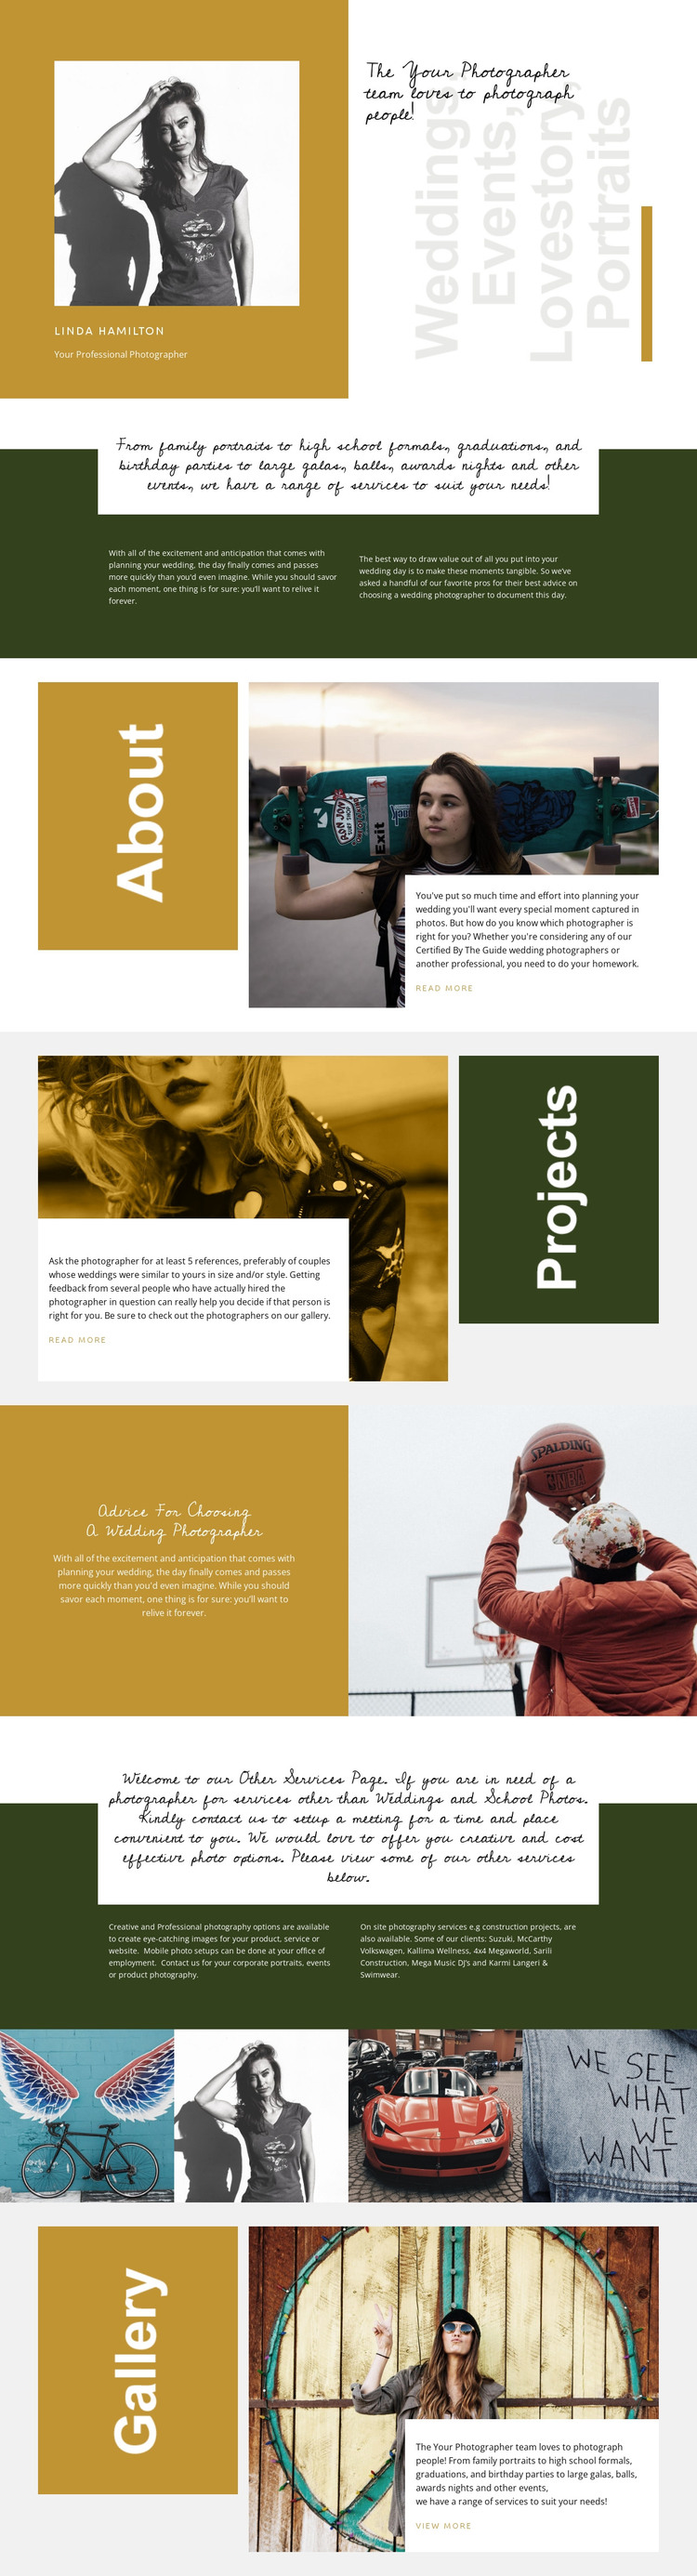 Fashion photography courses HTML Template